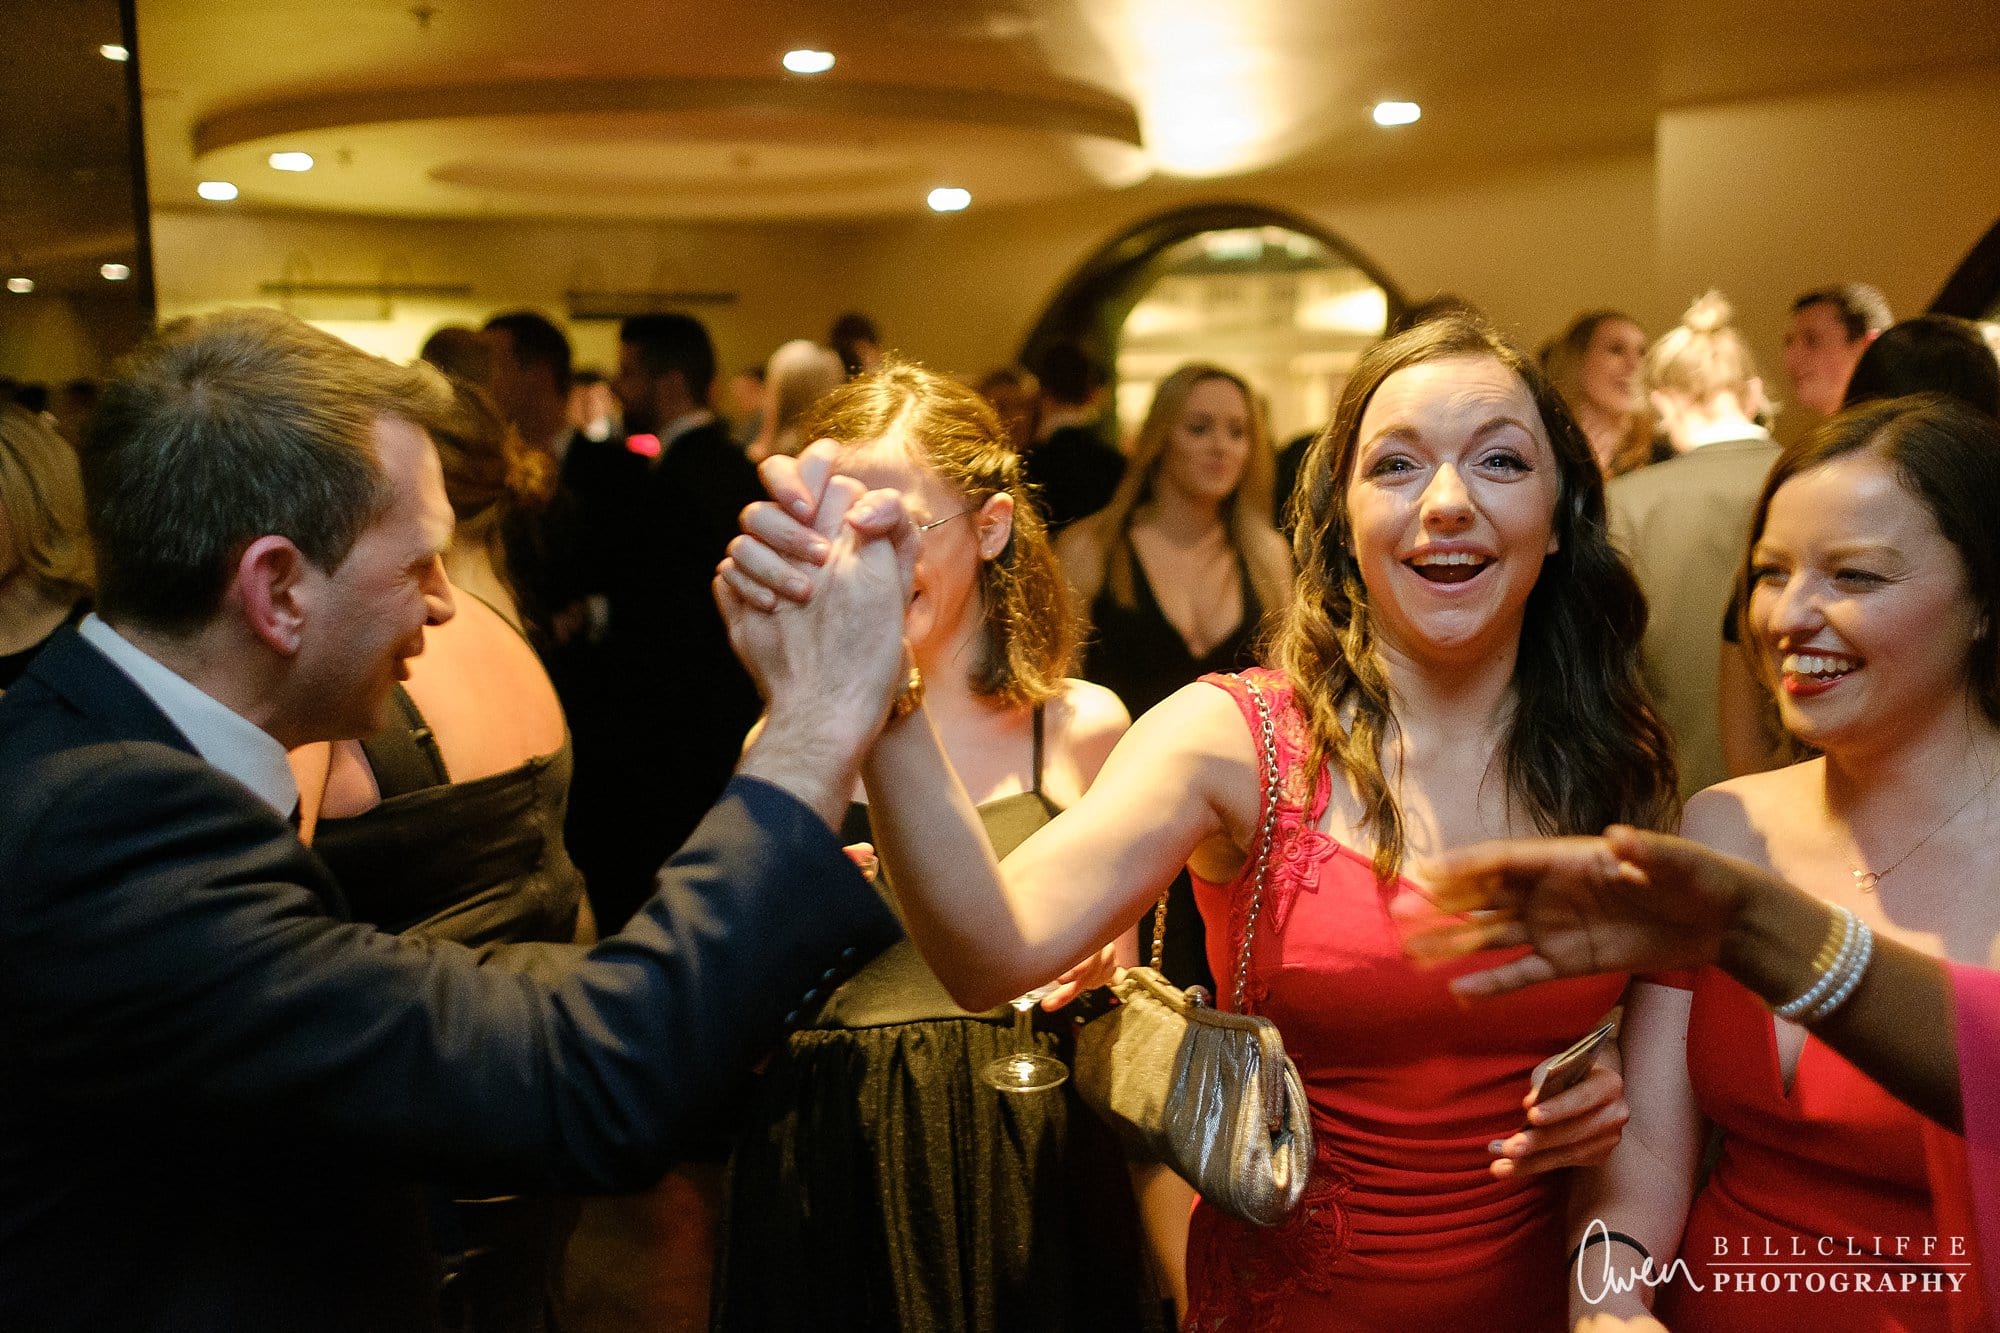 london wedding photographer magician lee smith 023 - Event Entertainer Spotlight: Lee Smith, Walkabout Magician